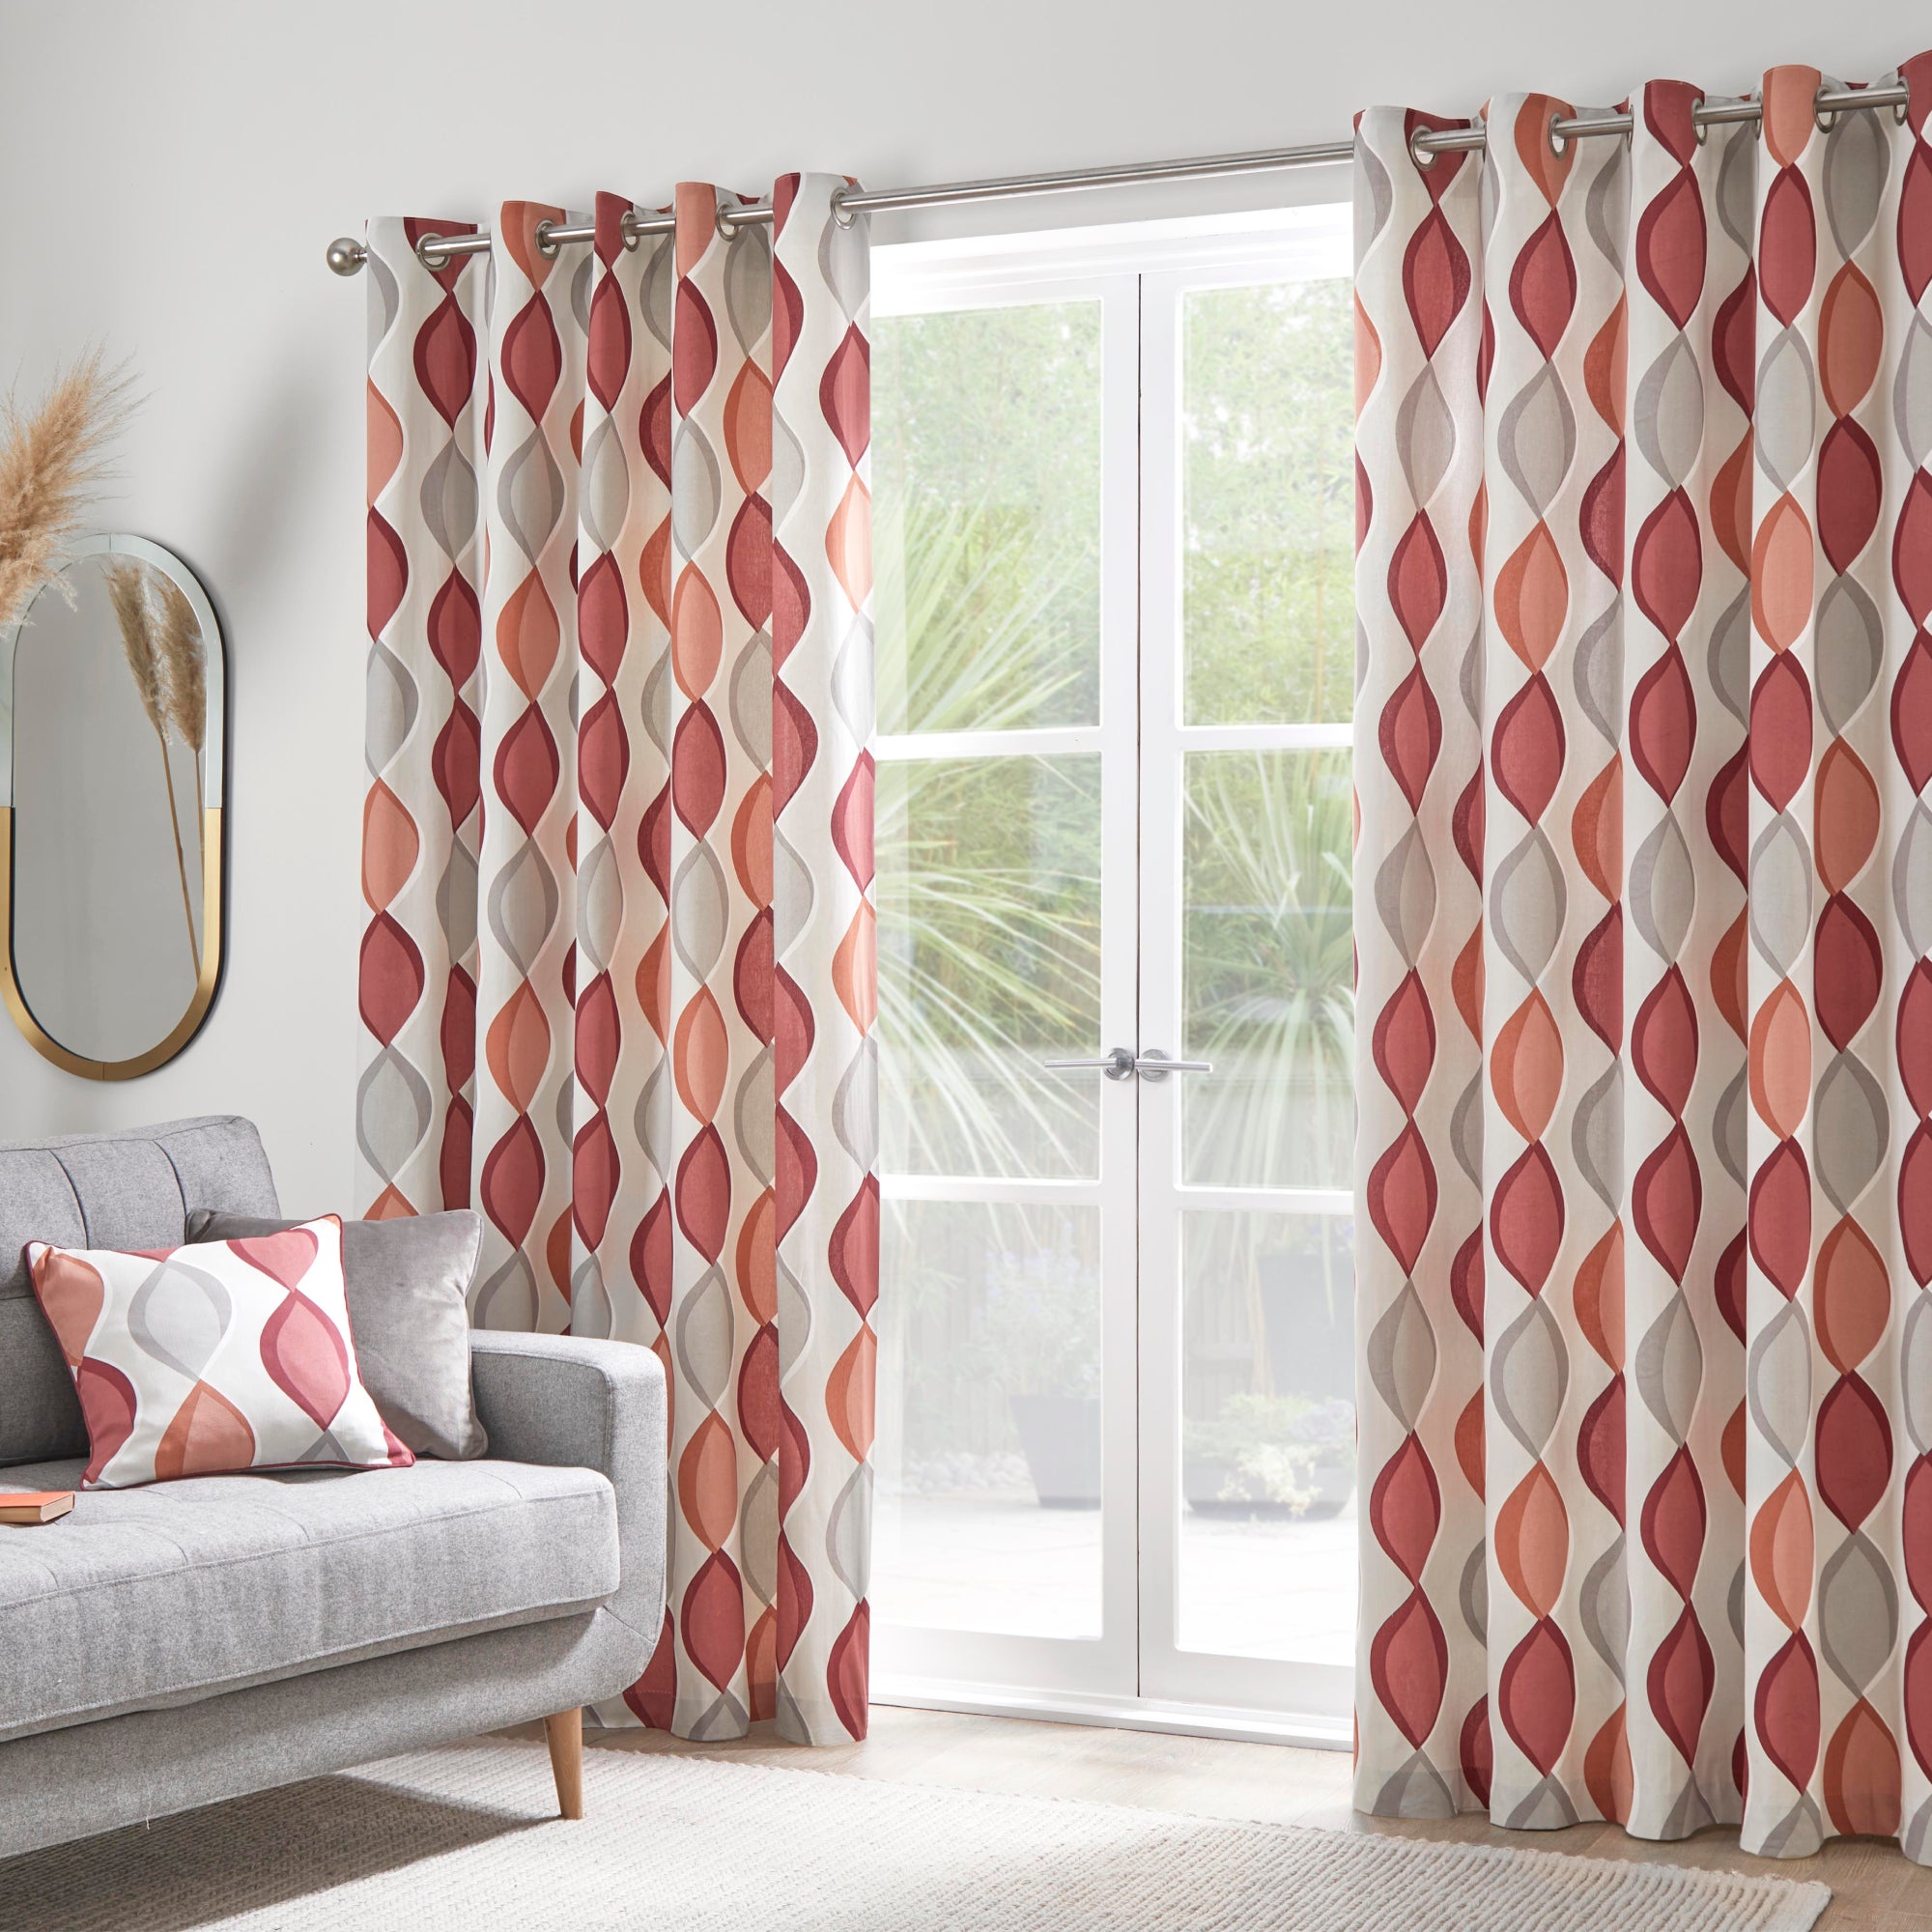 Pair of Eyelet Curtains Lennox by Fusion in Spice